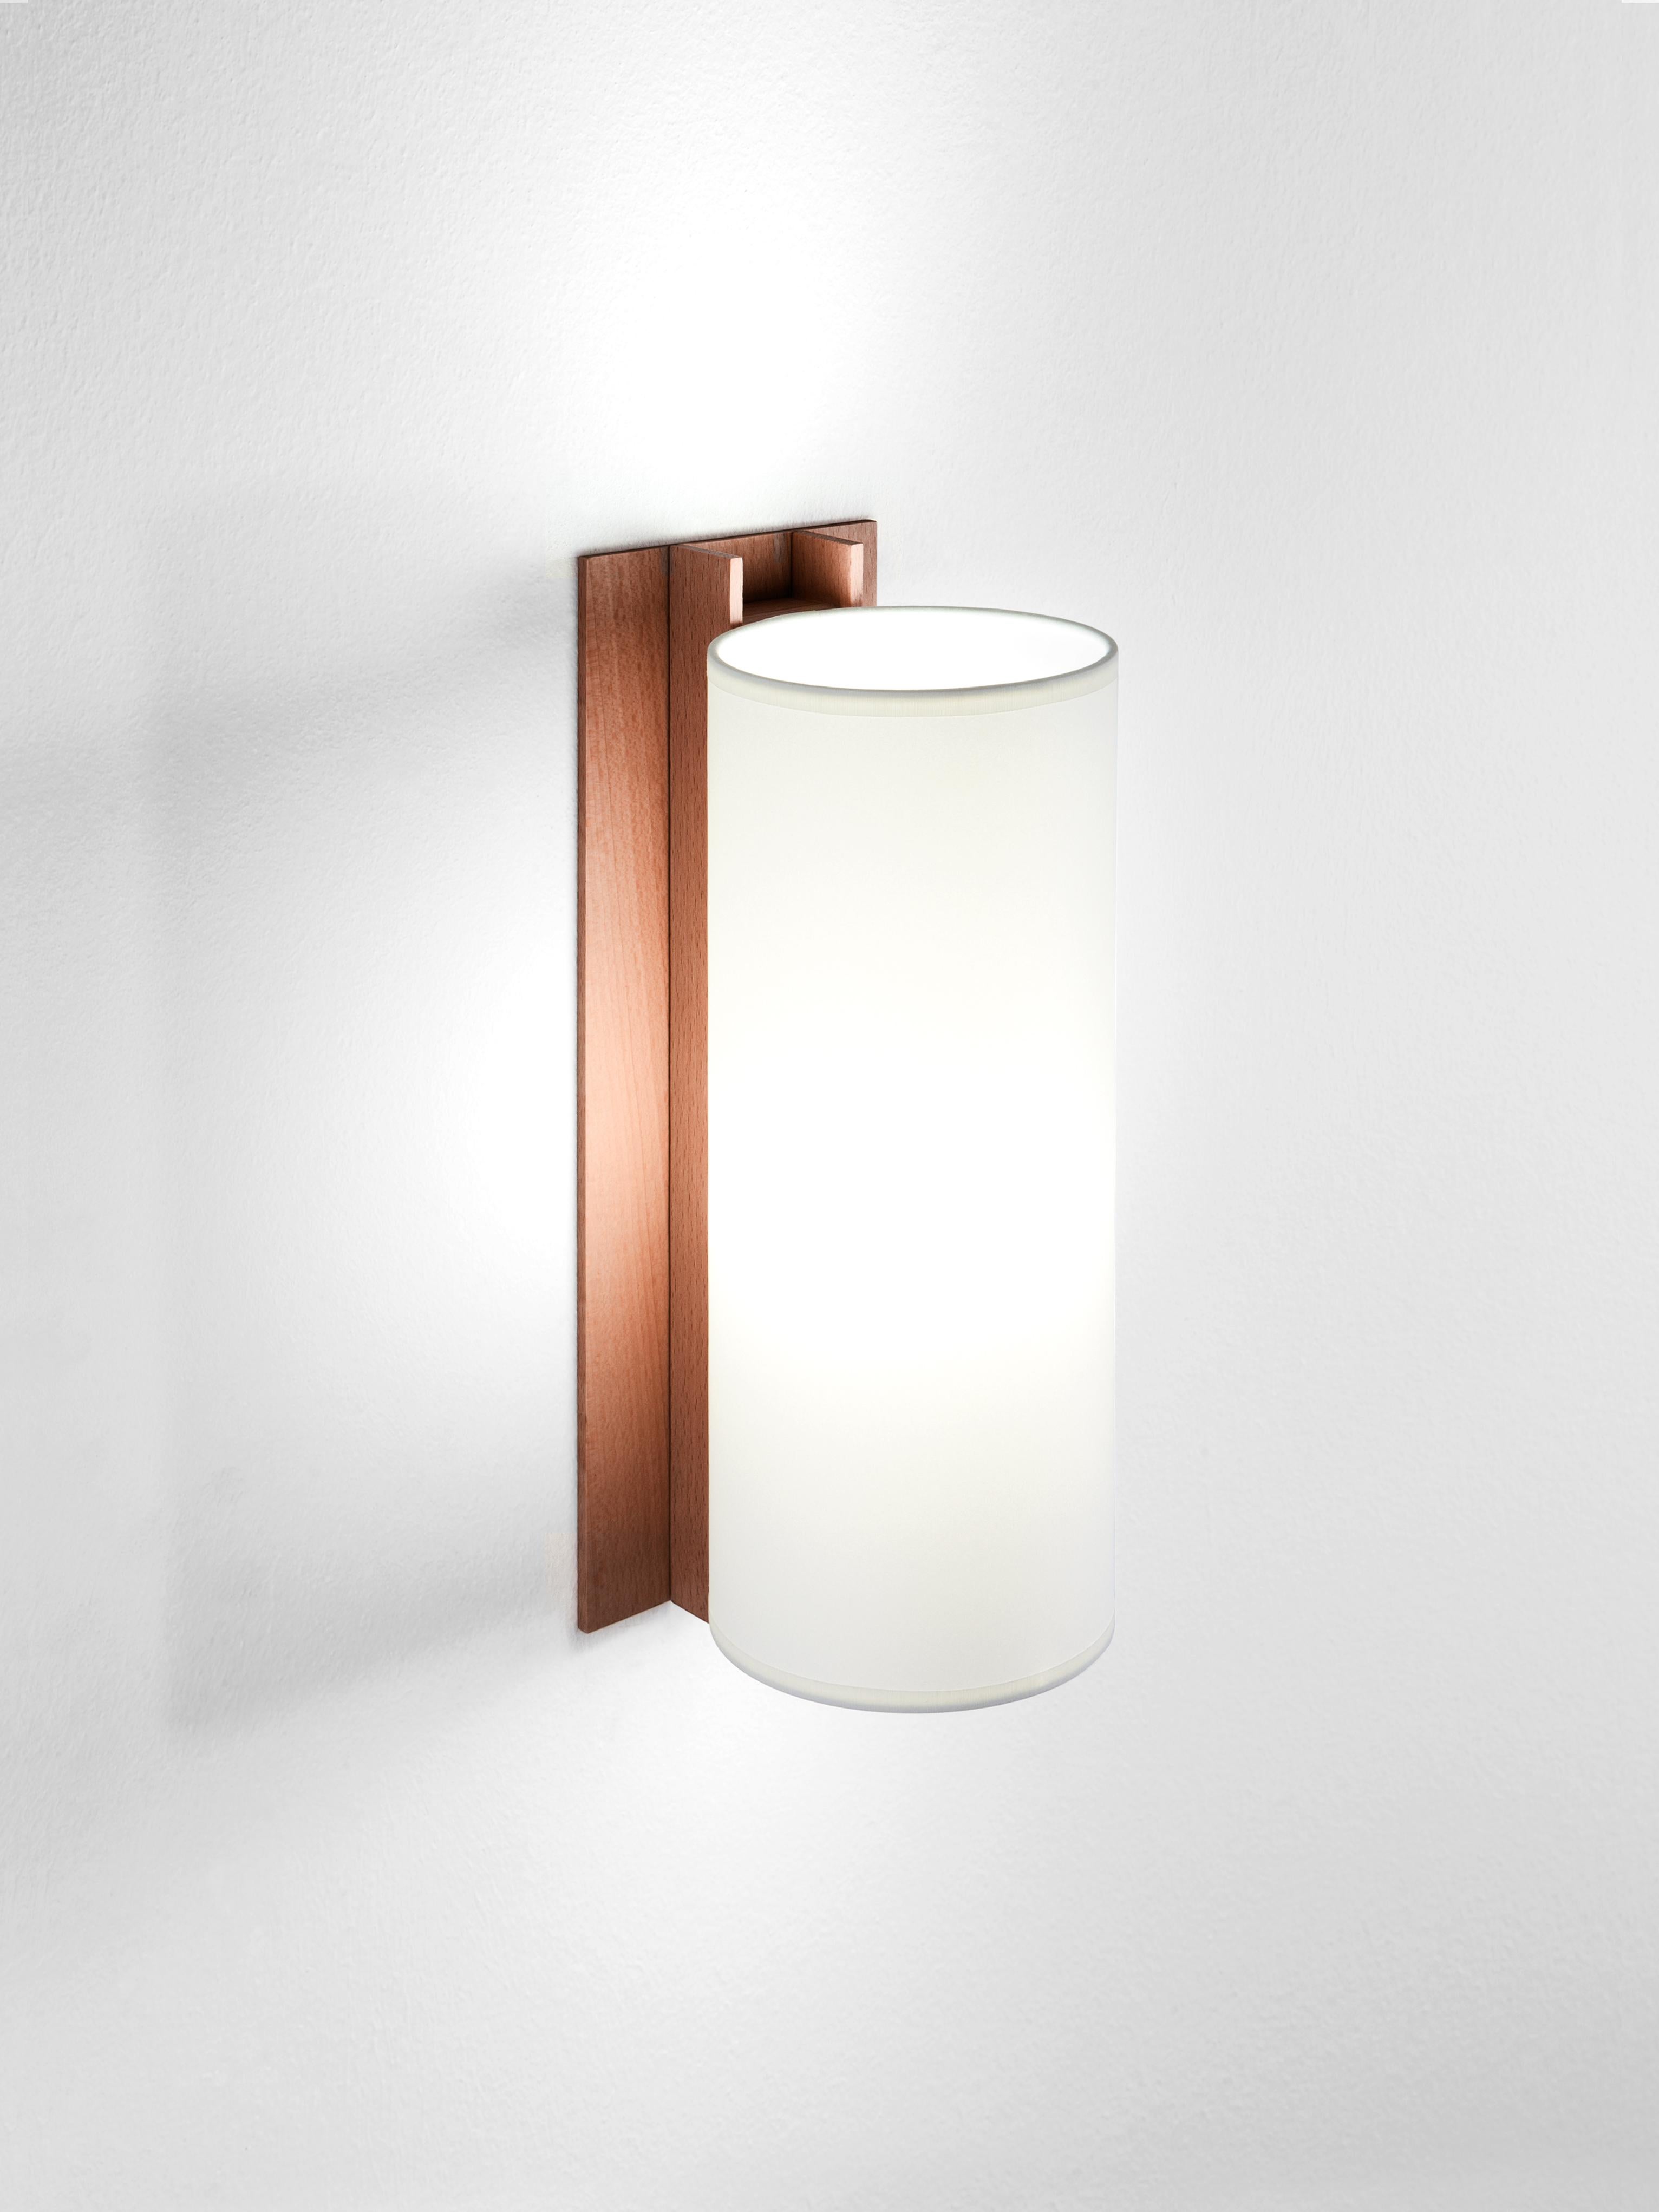 White and walnut TMM largo wall lamp by Miguel Milá
Dimensions: D 12 x W 15 x H 34 cm
Materials: Metal, walnut wood, parchment lampshade.
Available in beech or walnut and in white or beige lampshade.

The long and short wall lamps belonging to the